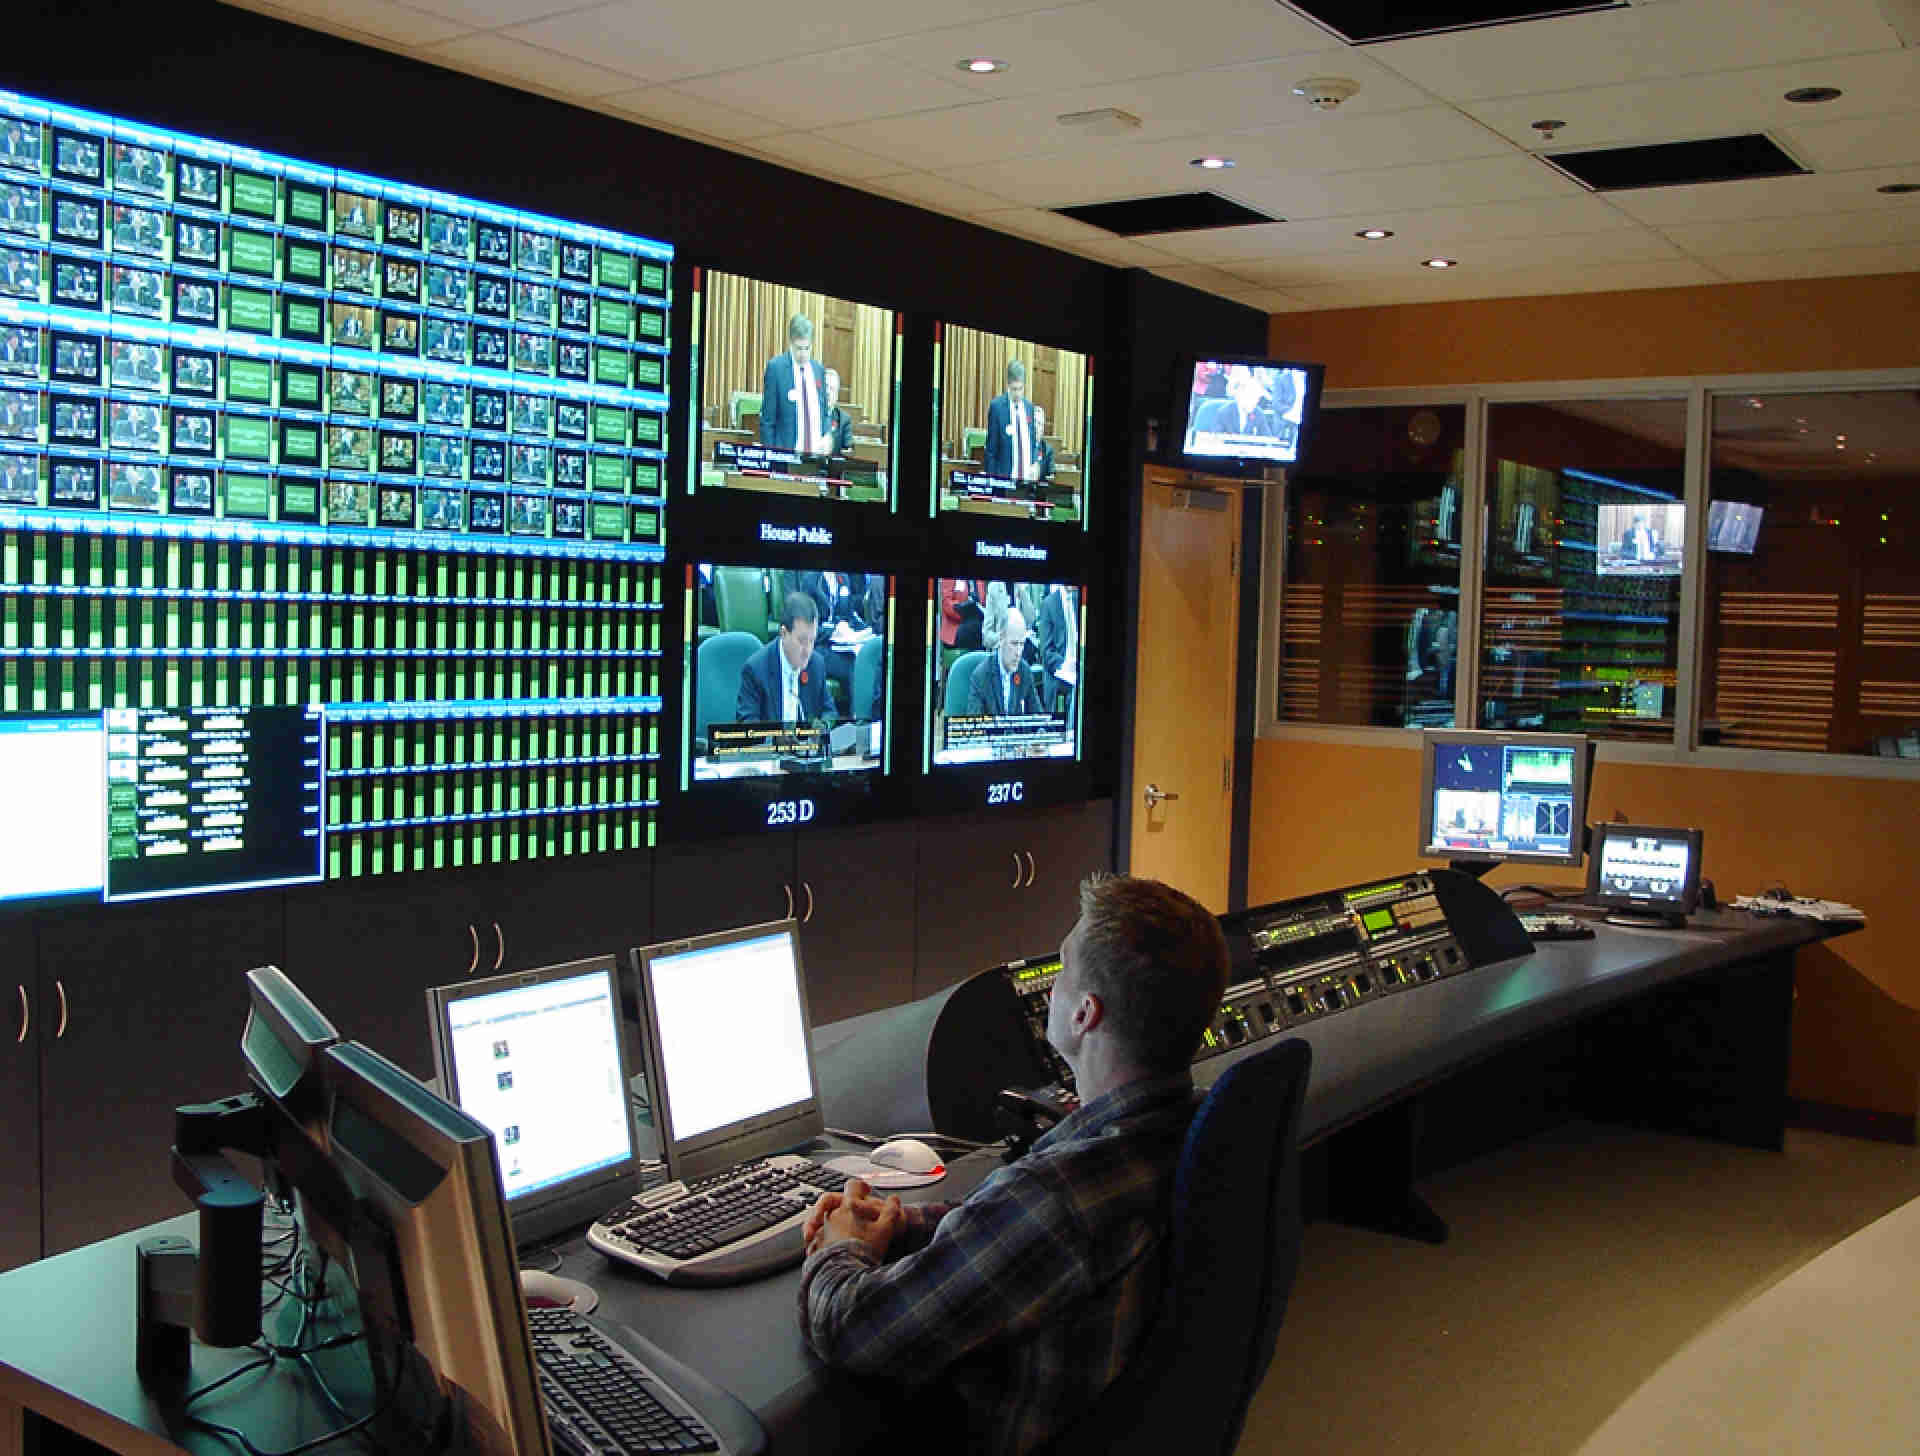 House of Commons, Master Control - house-of-commons-1